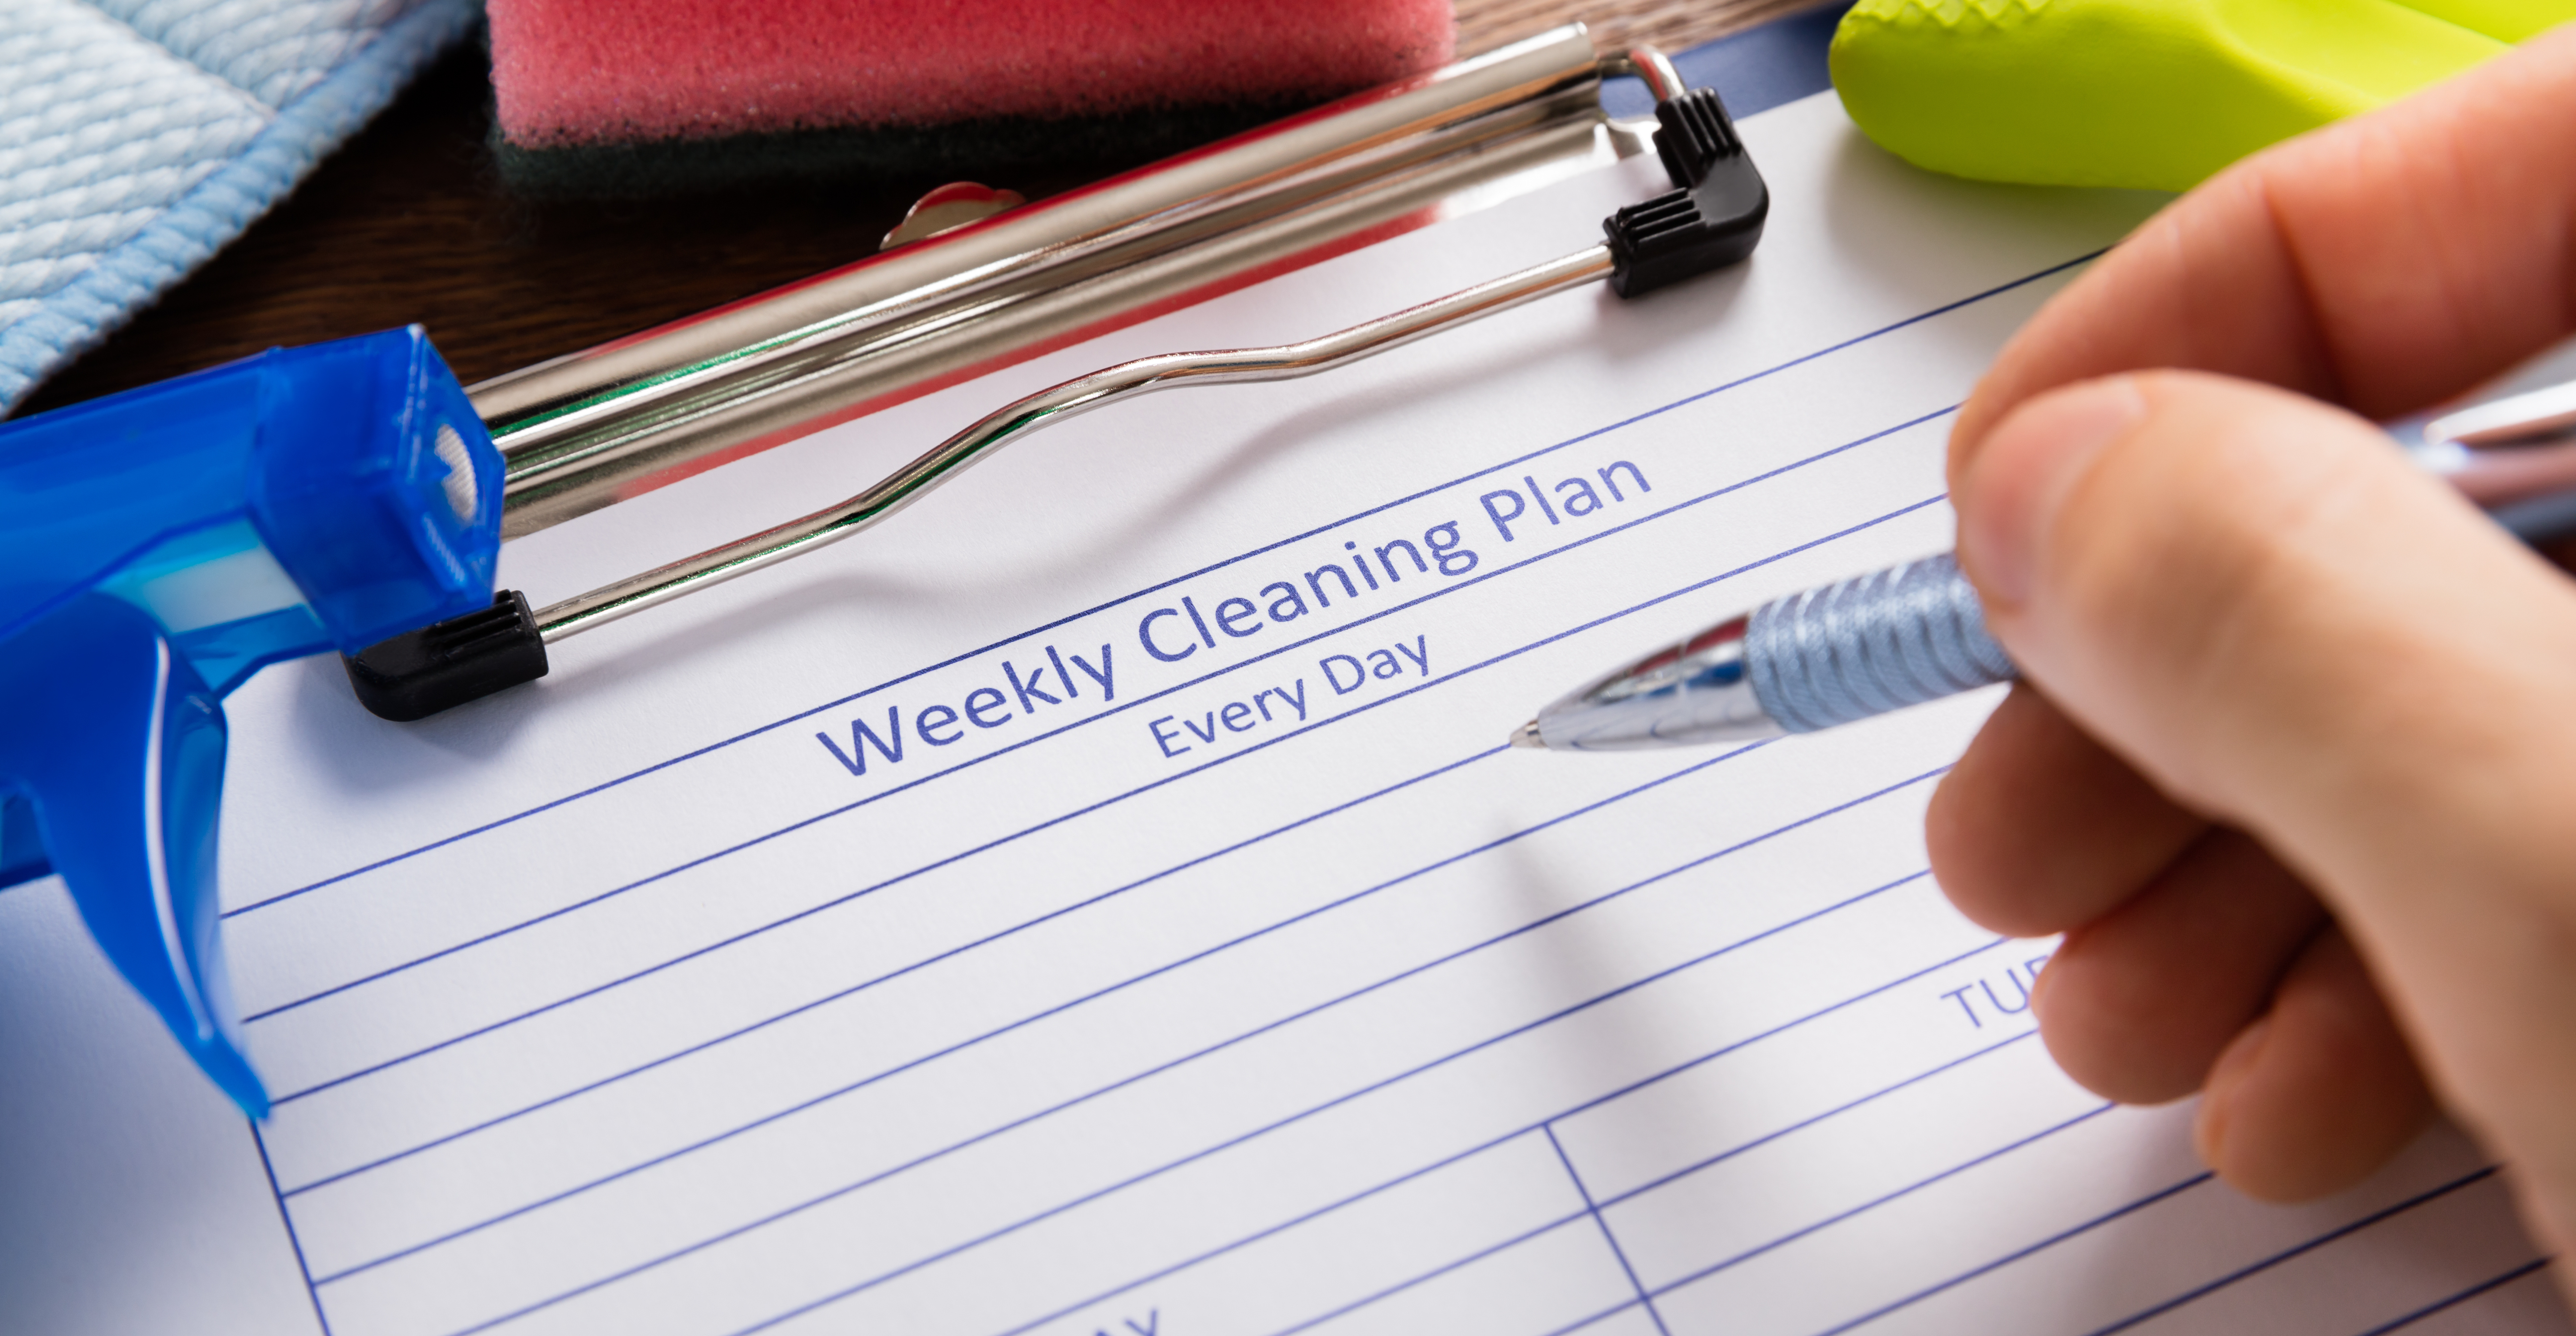 weekly house cleaning schedule